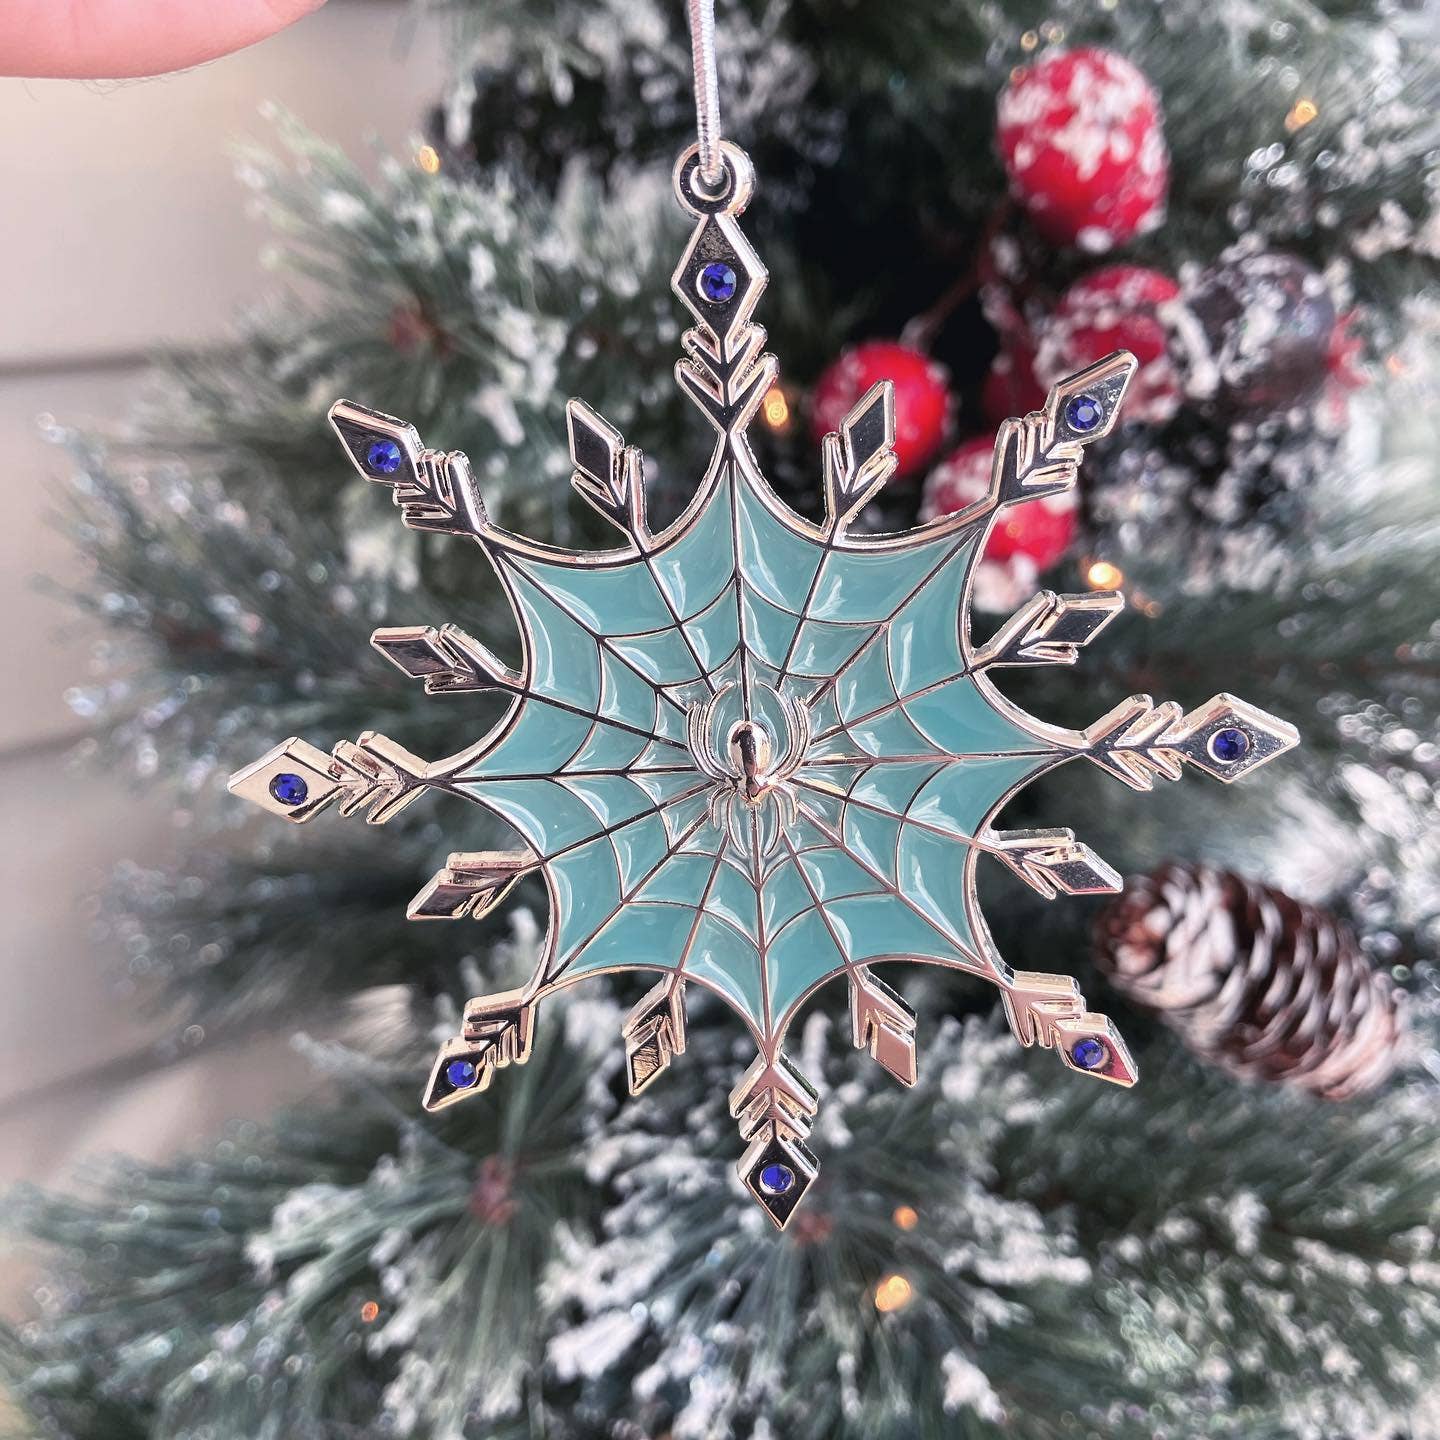 The Christmas Spider - Ornament